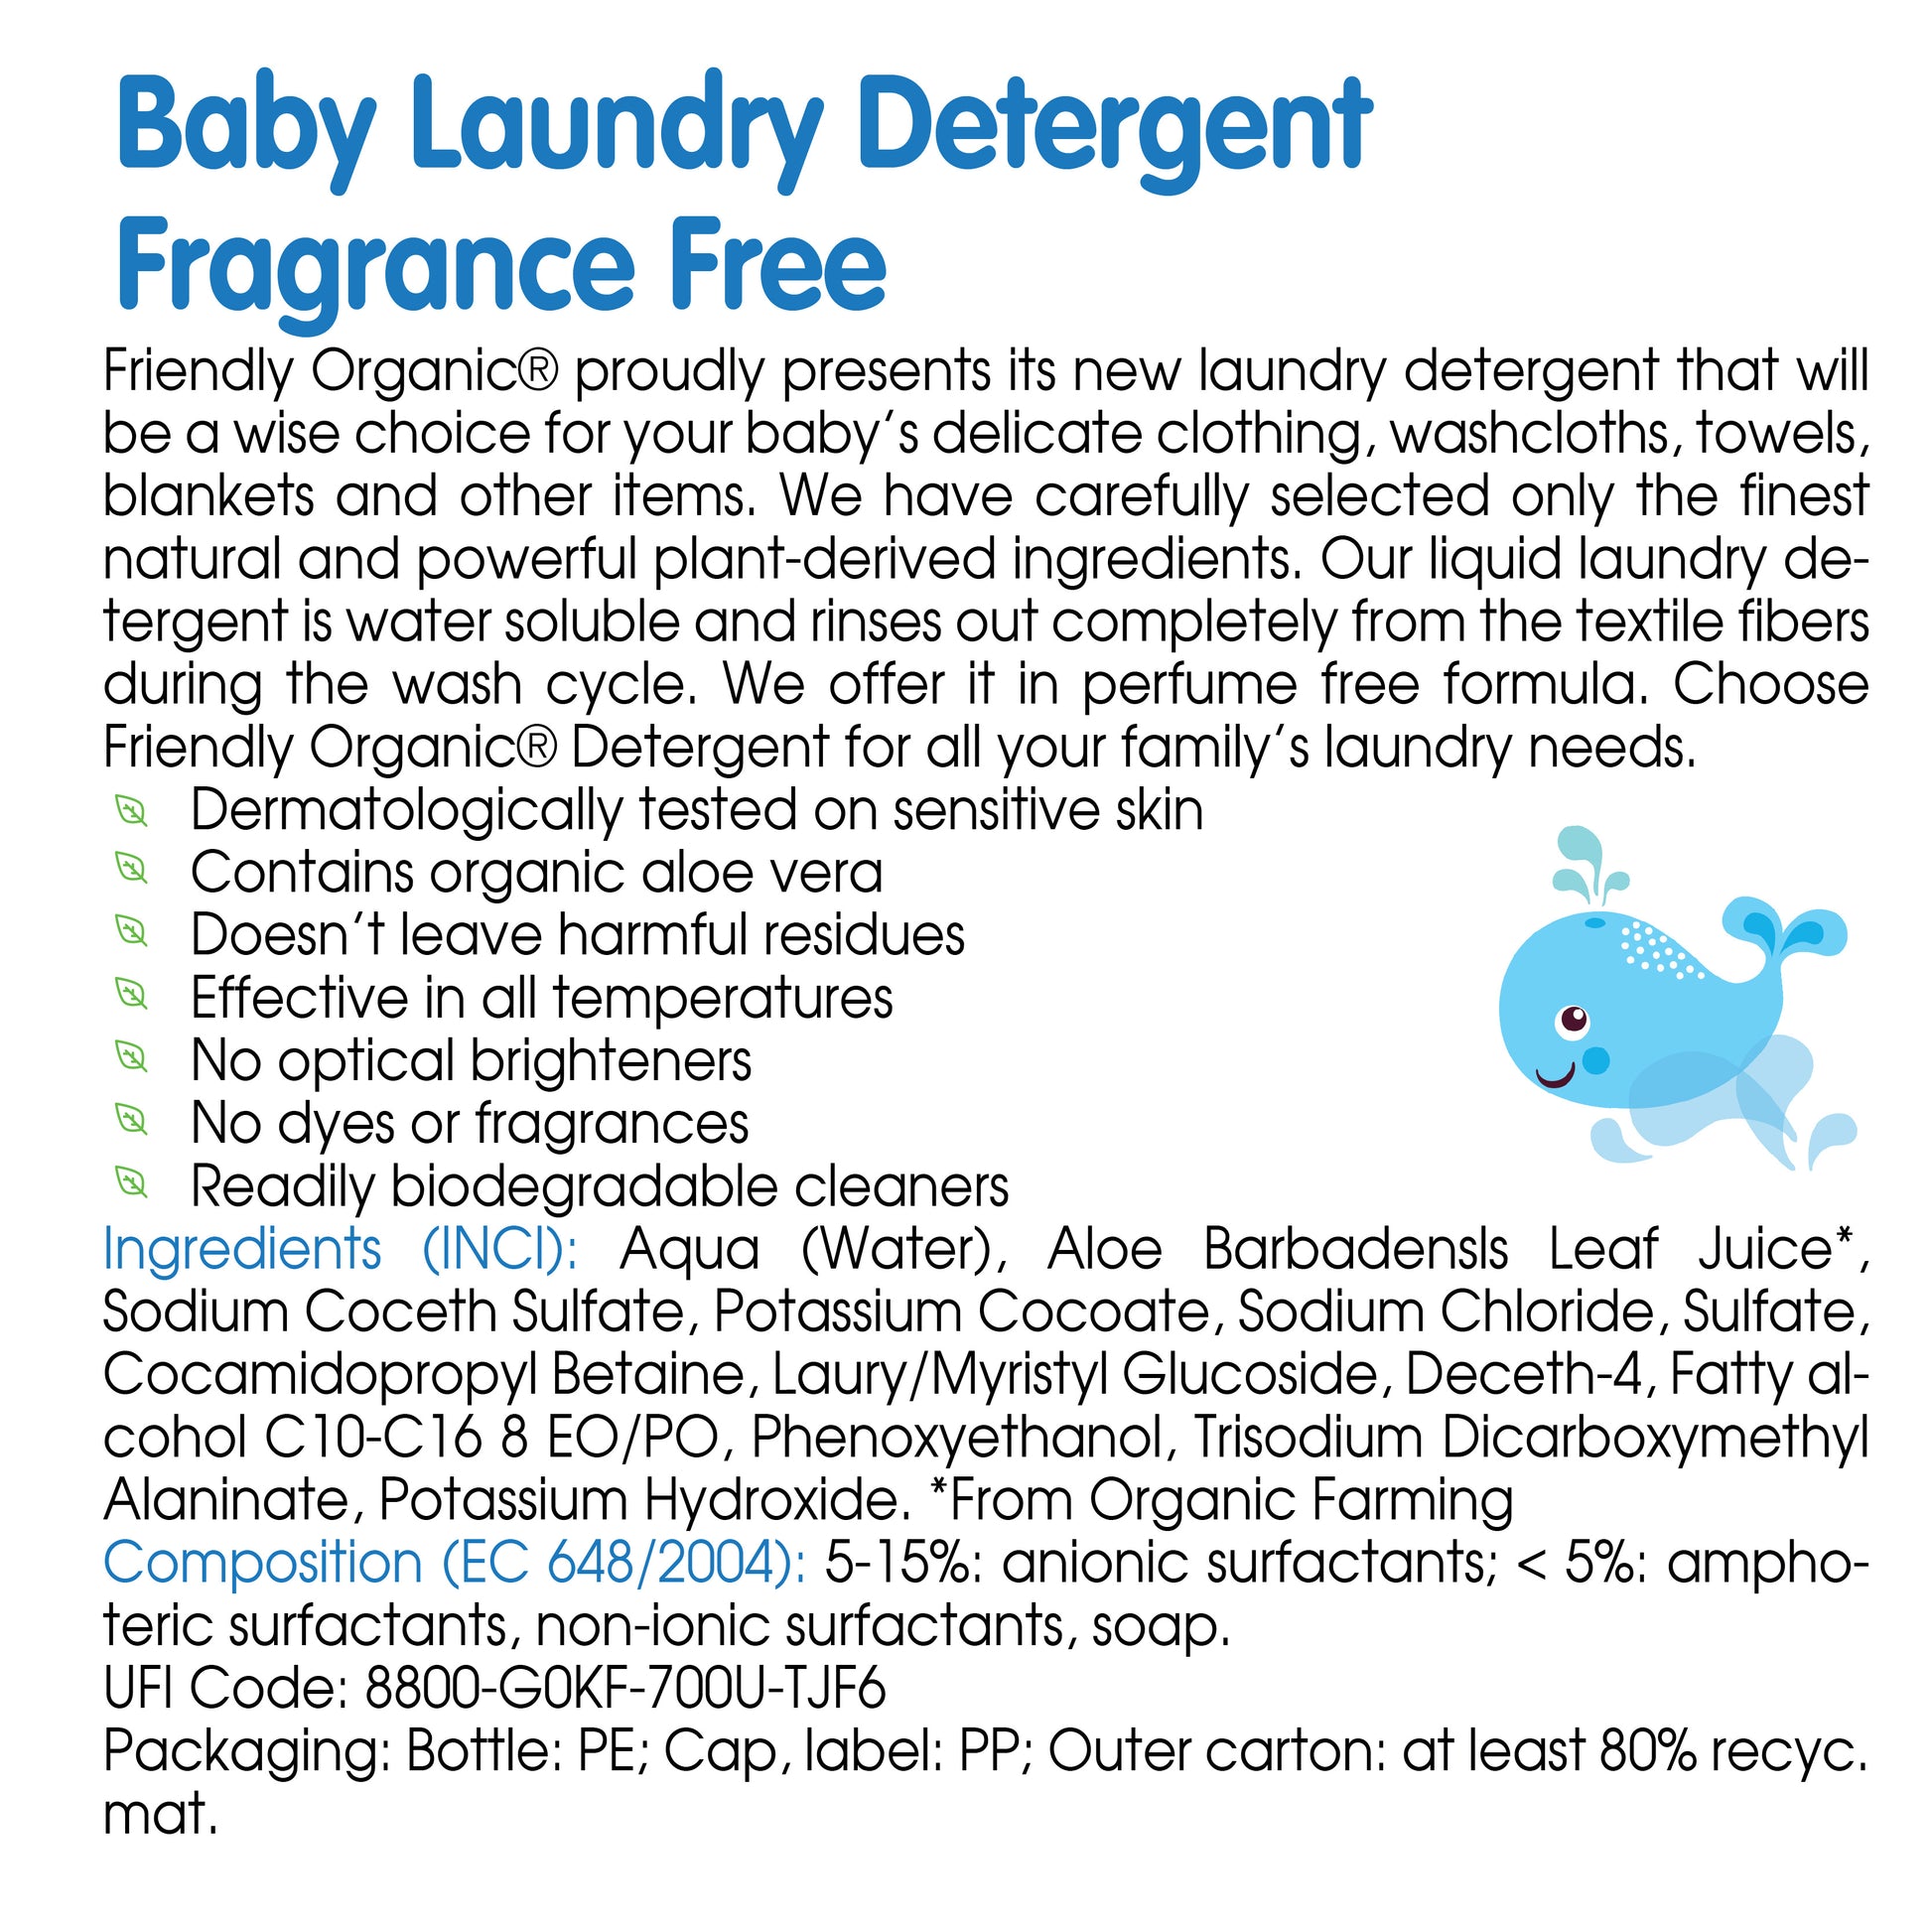 Friendly Organic Fragrance Free Baby Laundry Detergent, White